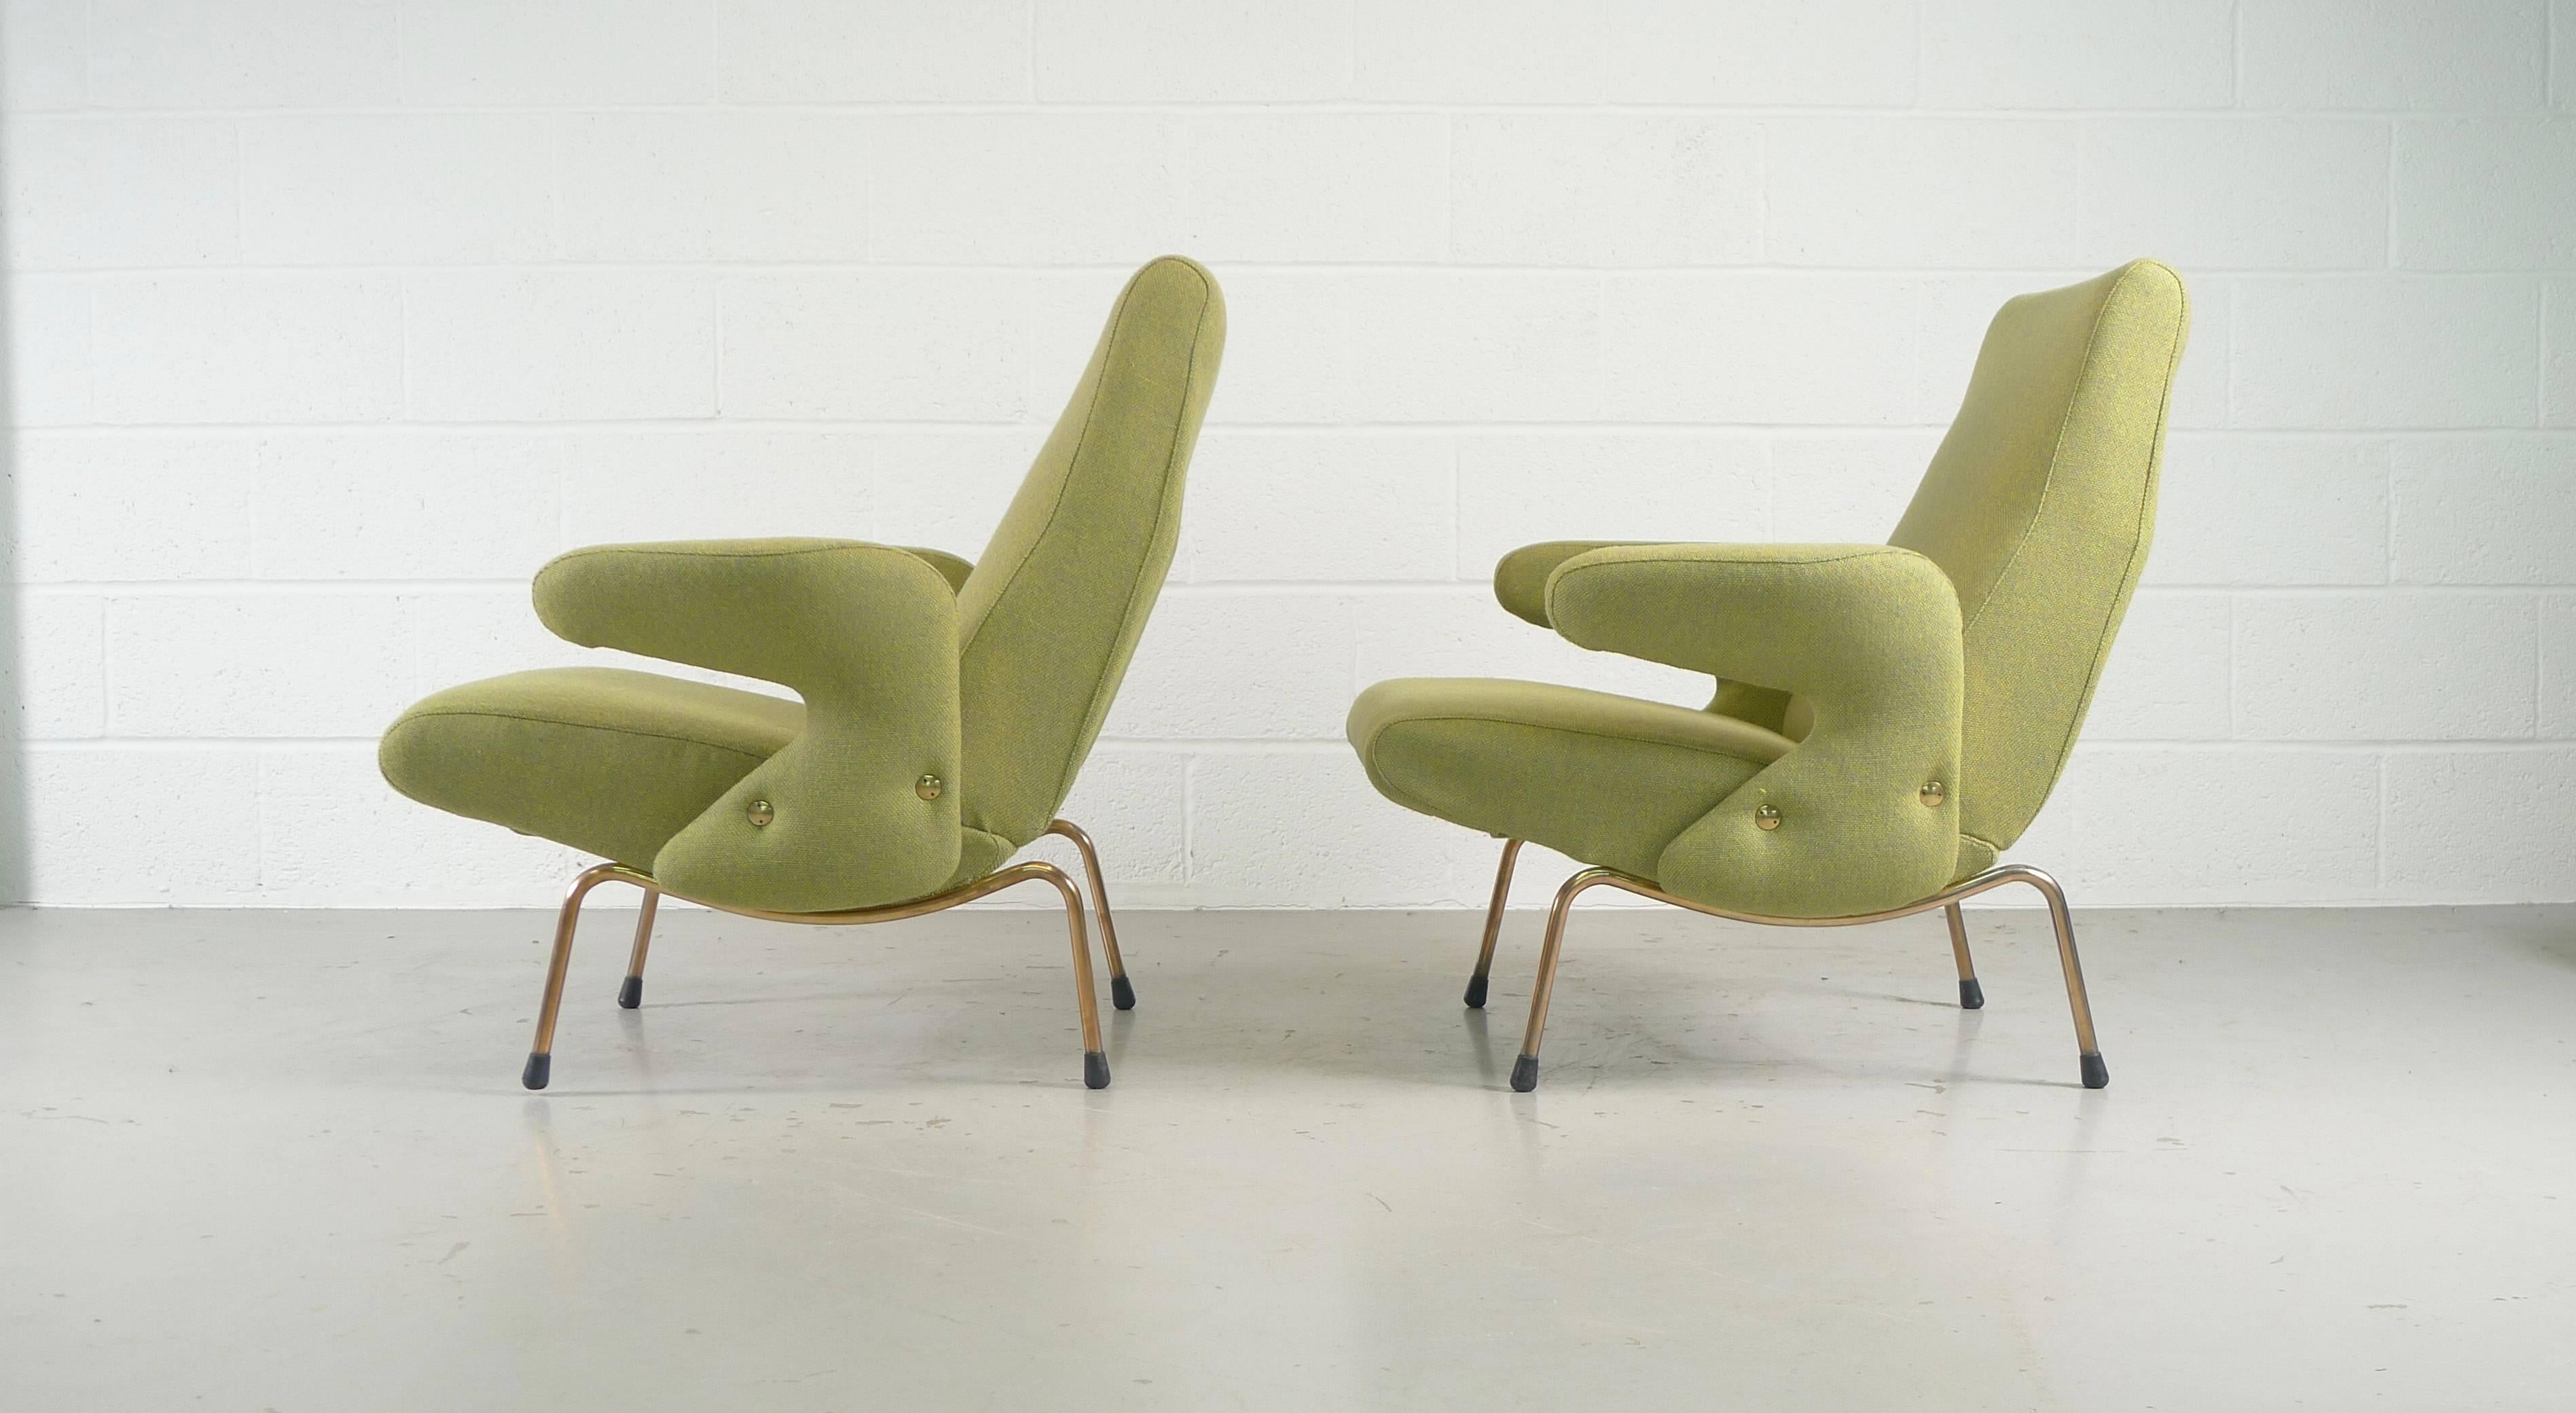 Erberto Carboni for Arflex, Italy, 1952. A pair of Delfino or Dolphin armchairs, newly reupholstered in fabulous Kvadrat 